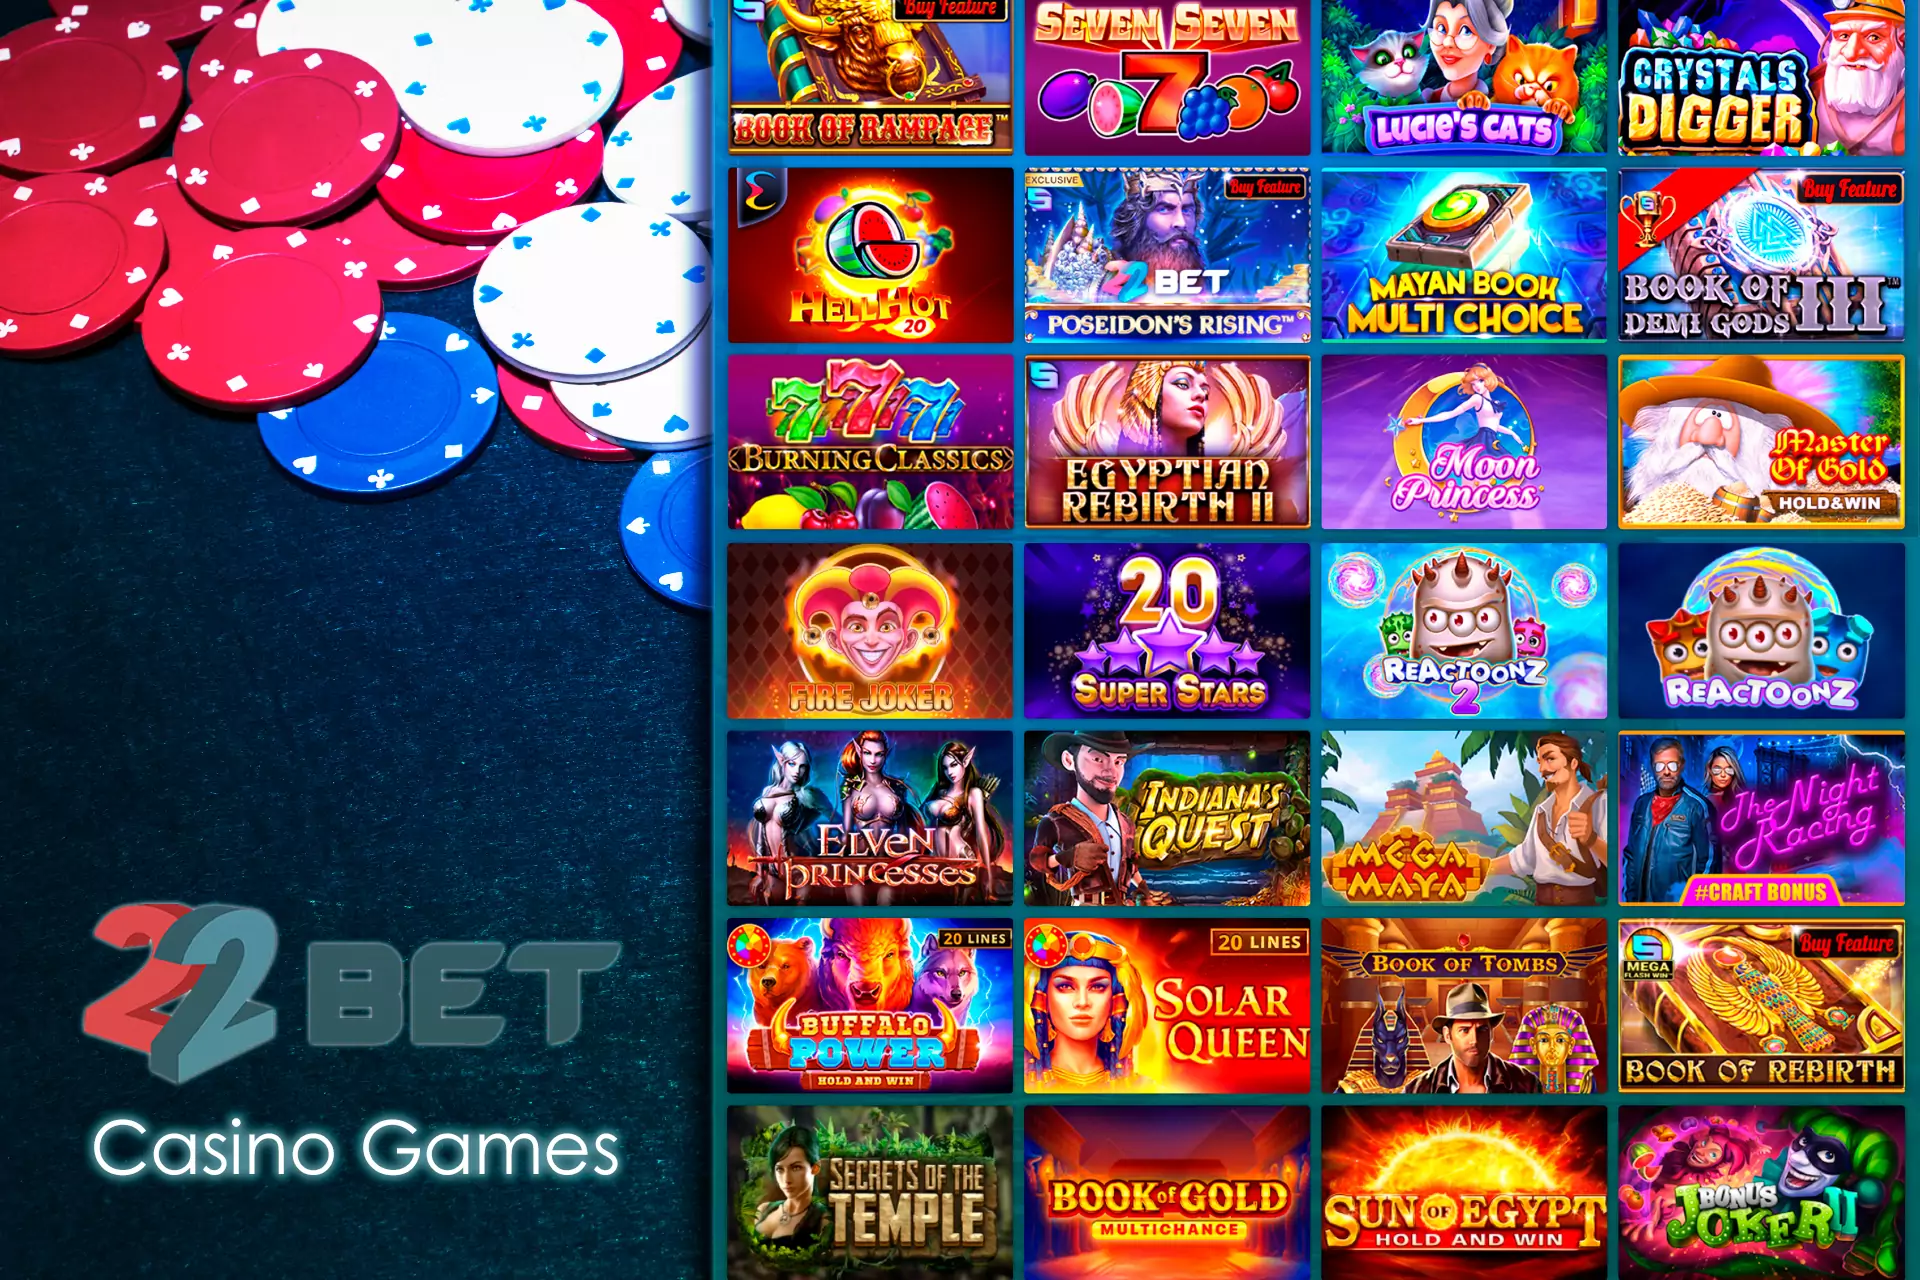 In the section of the casino, you must try slots and table games.